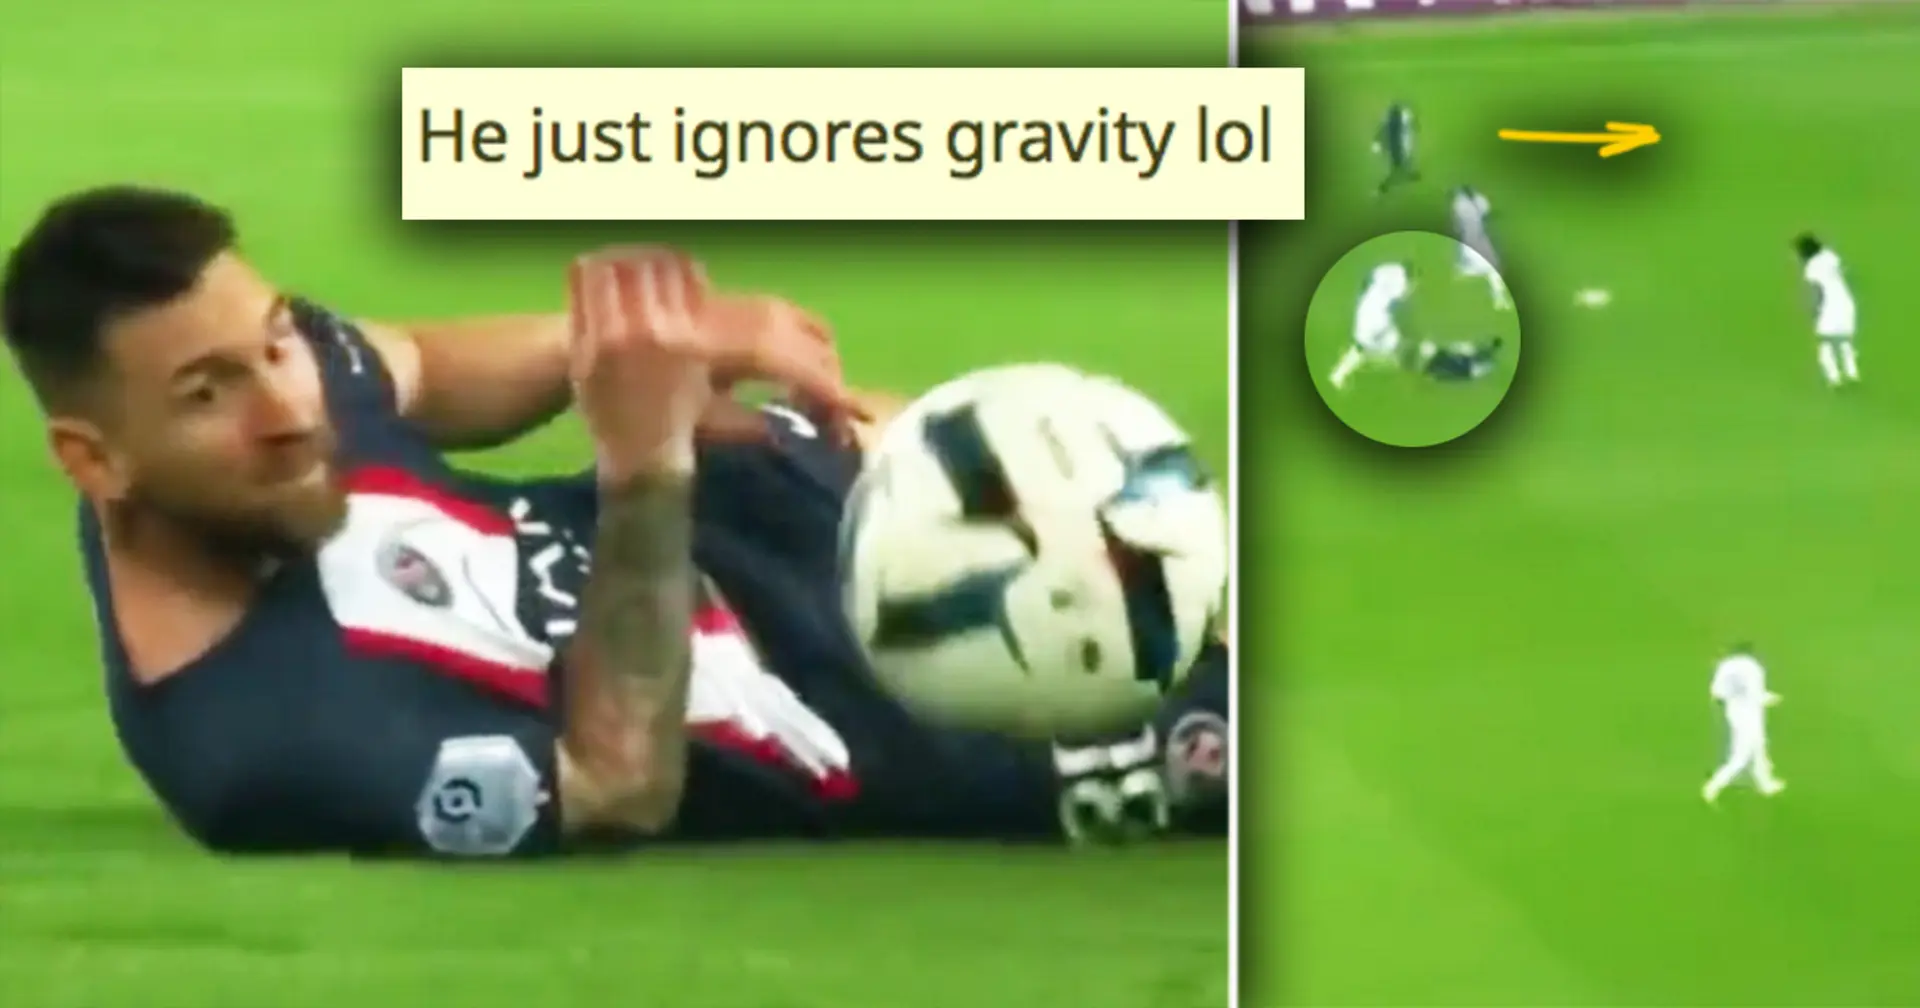 Messi provides Neymar with line-breaking pass while on the ground, fans react